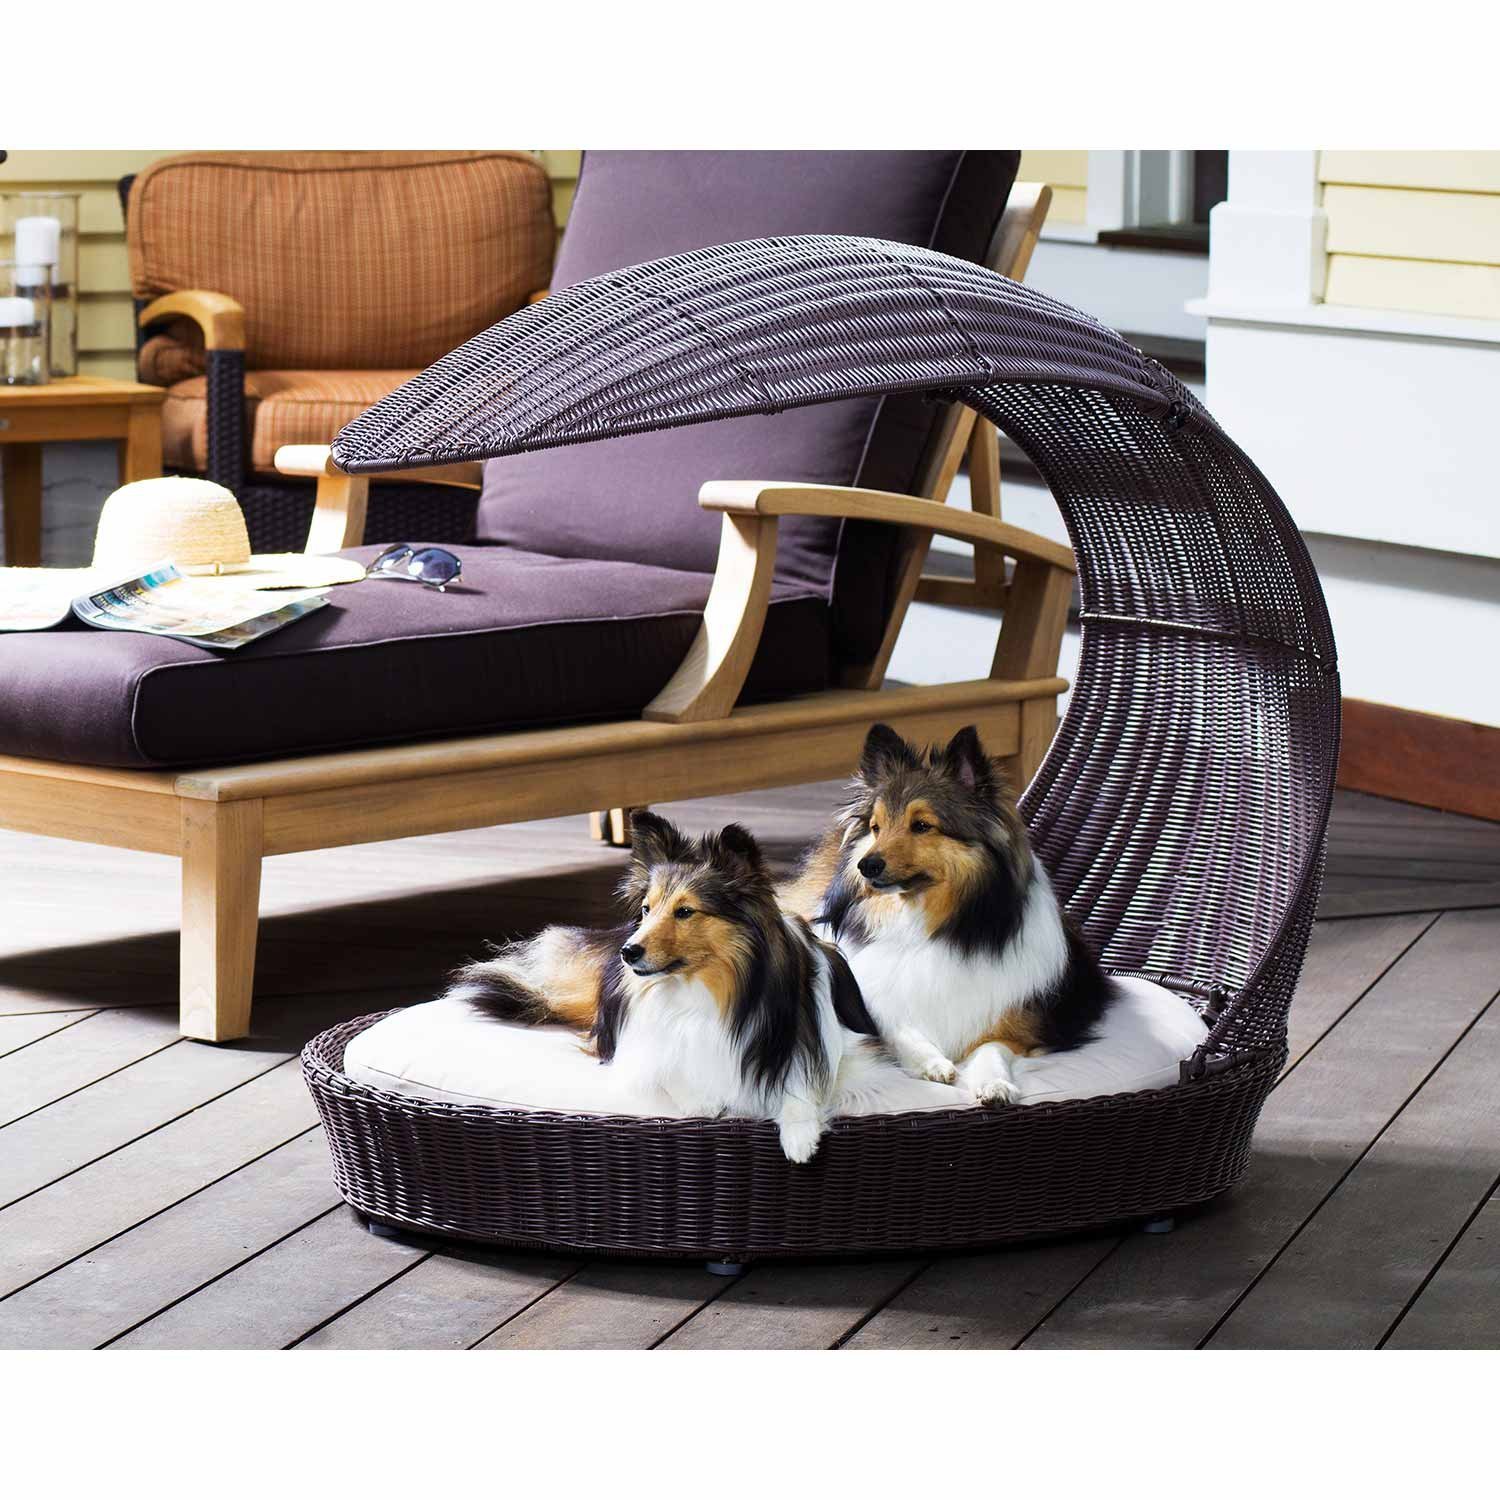 12 Beautiful Dog Beds That Will Instantly Enhance Your Home's Decor